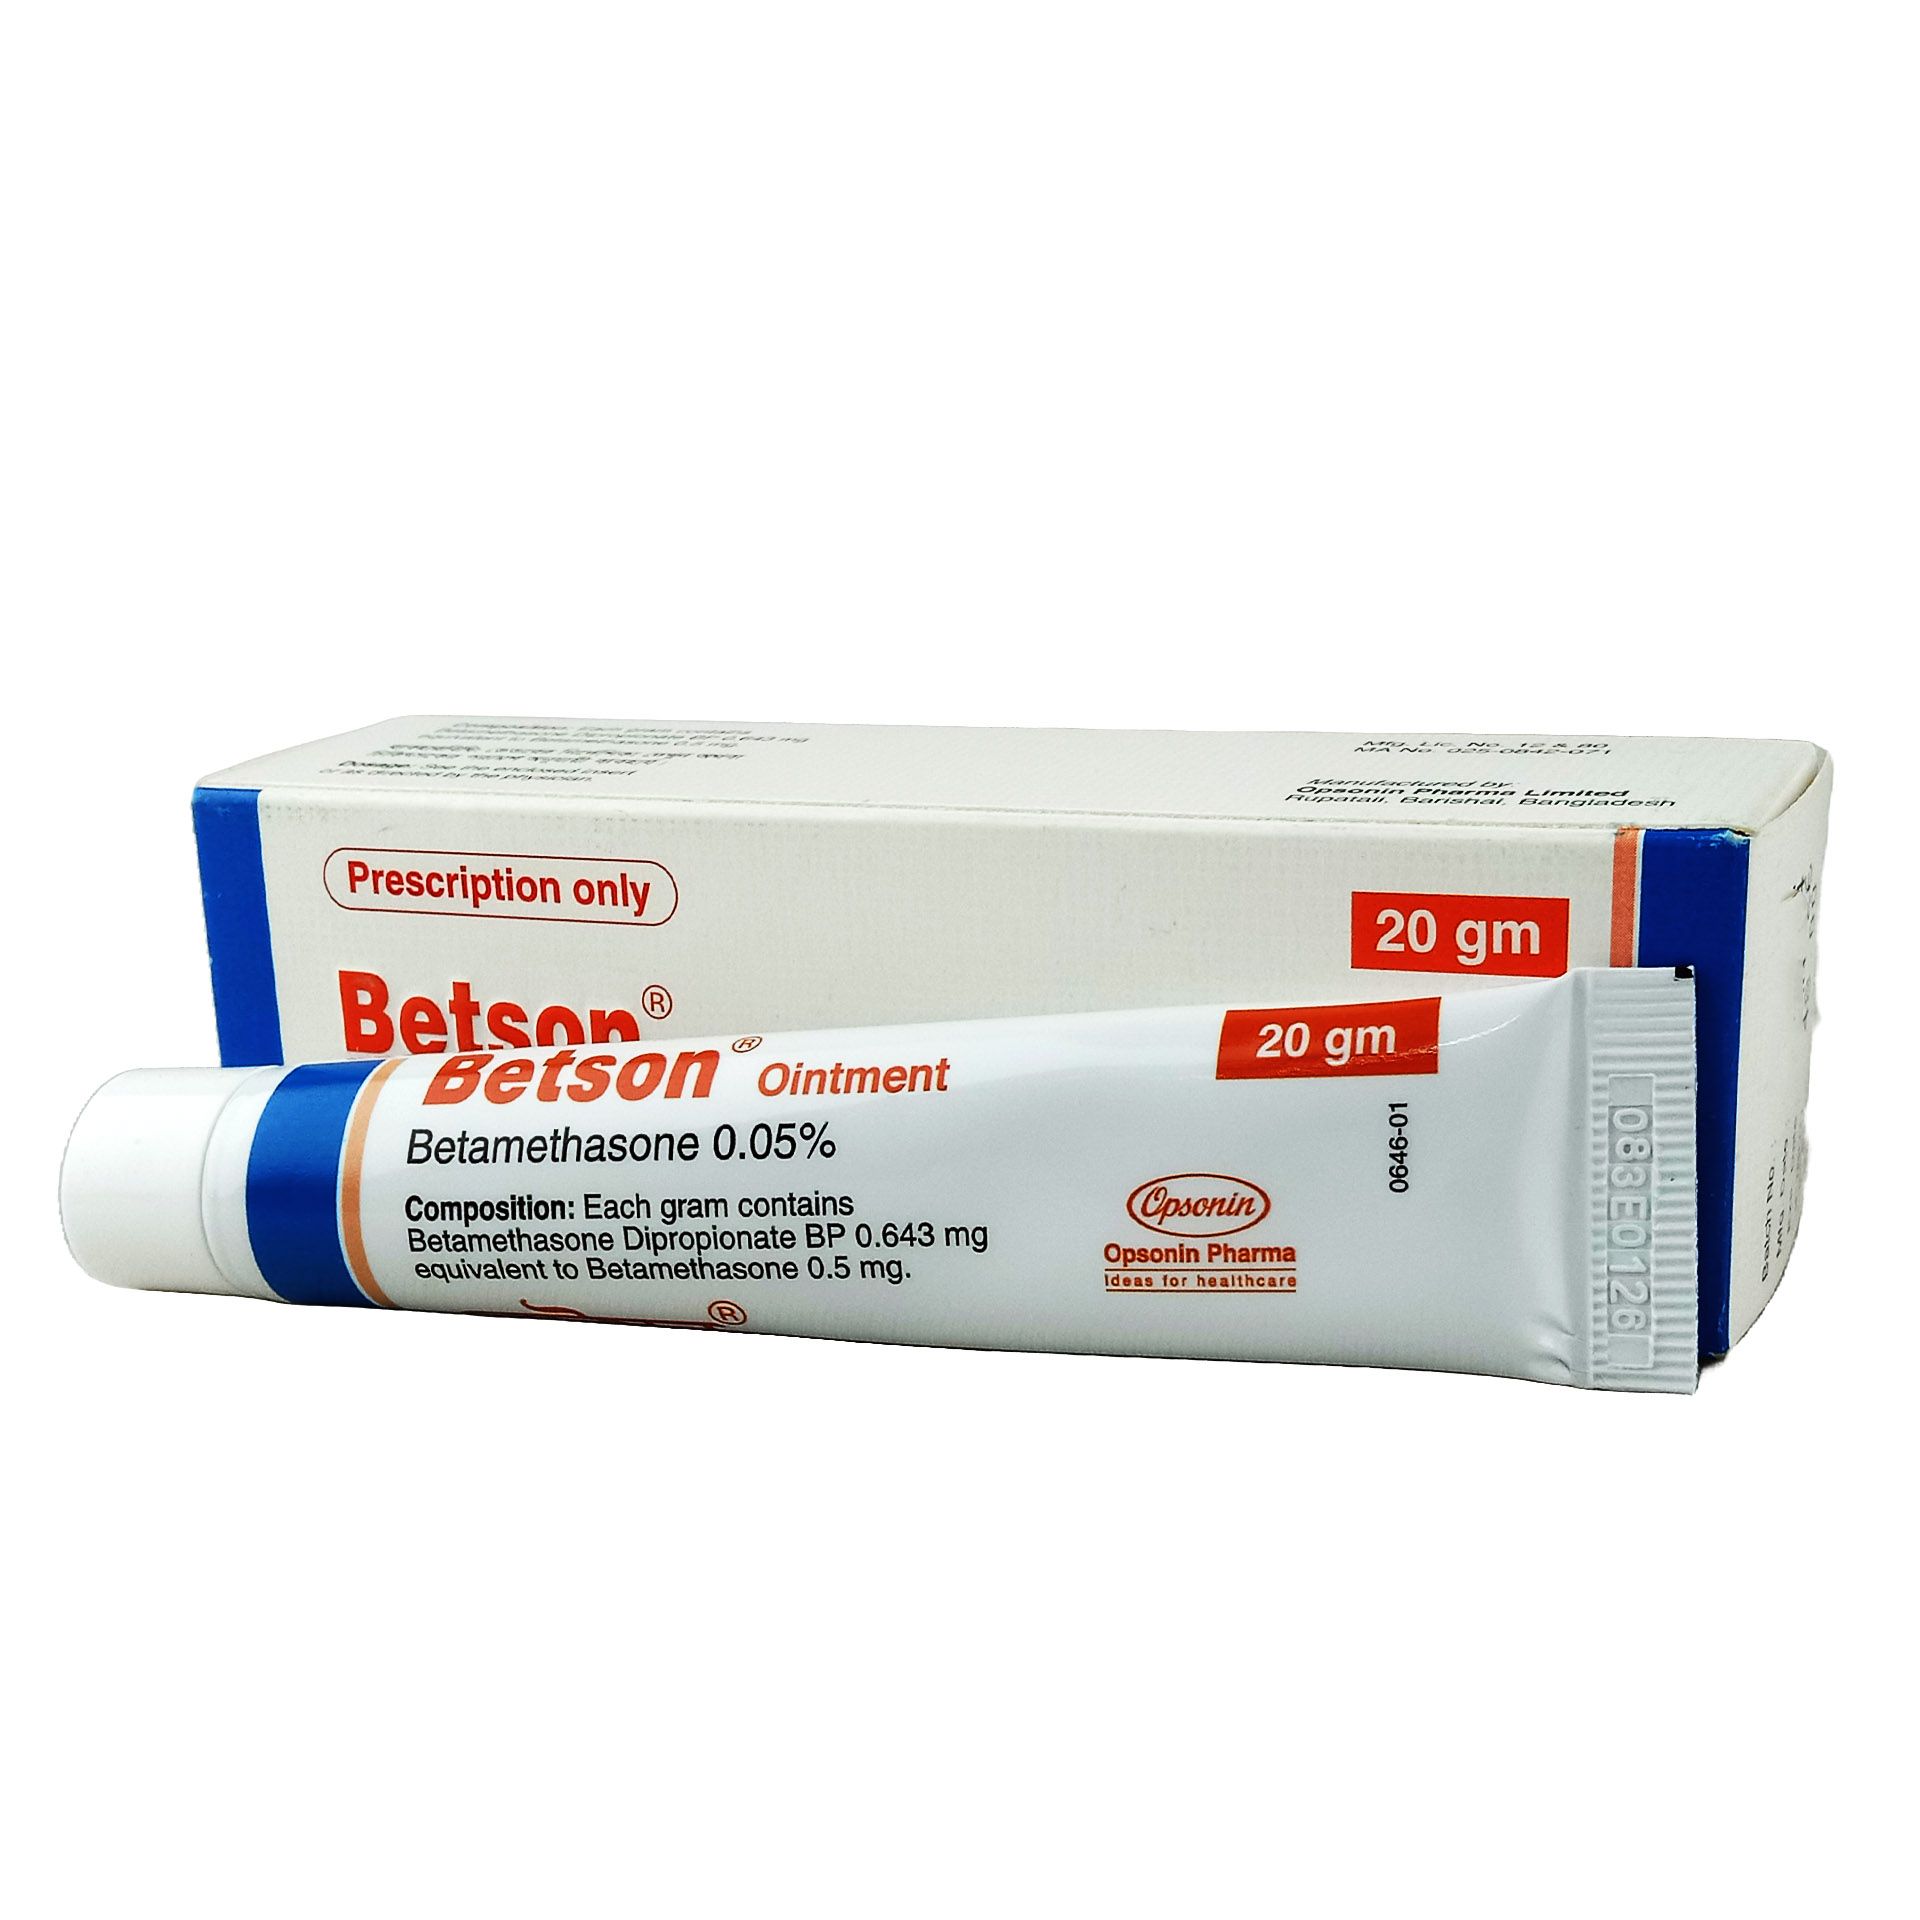 Betson 0.05% Ointment